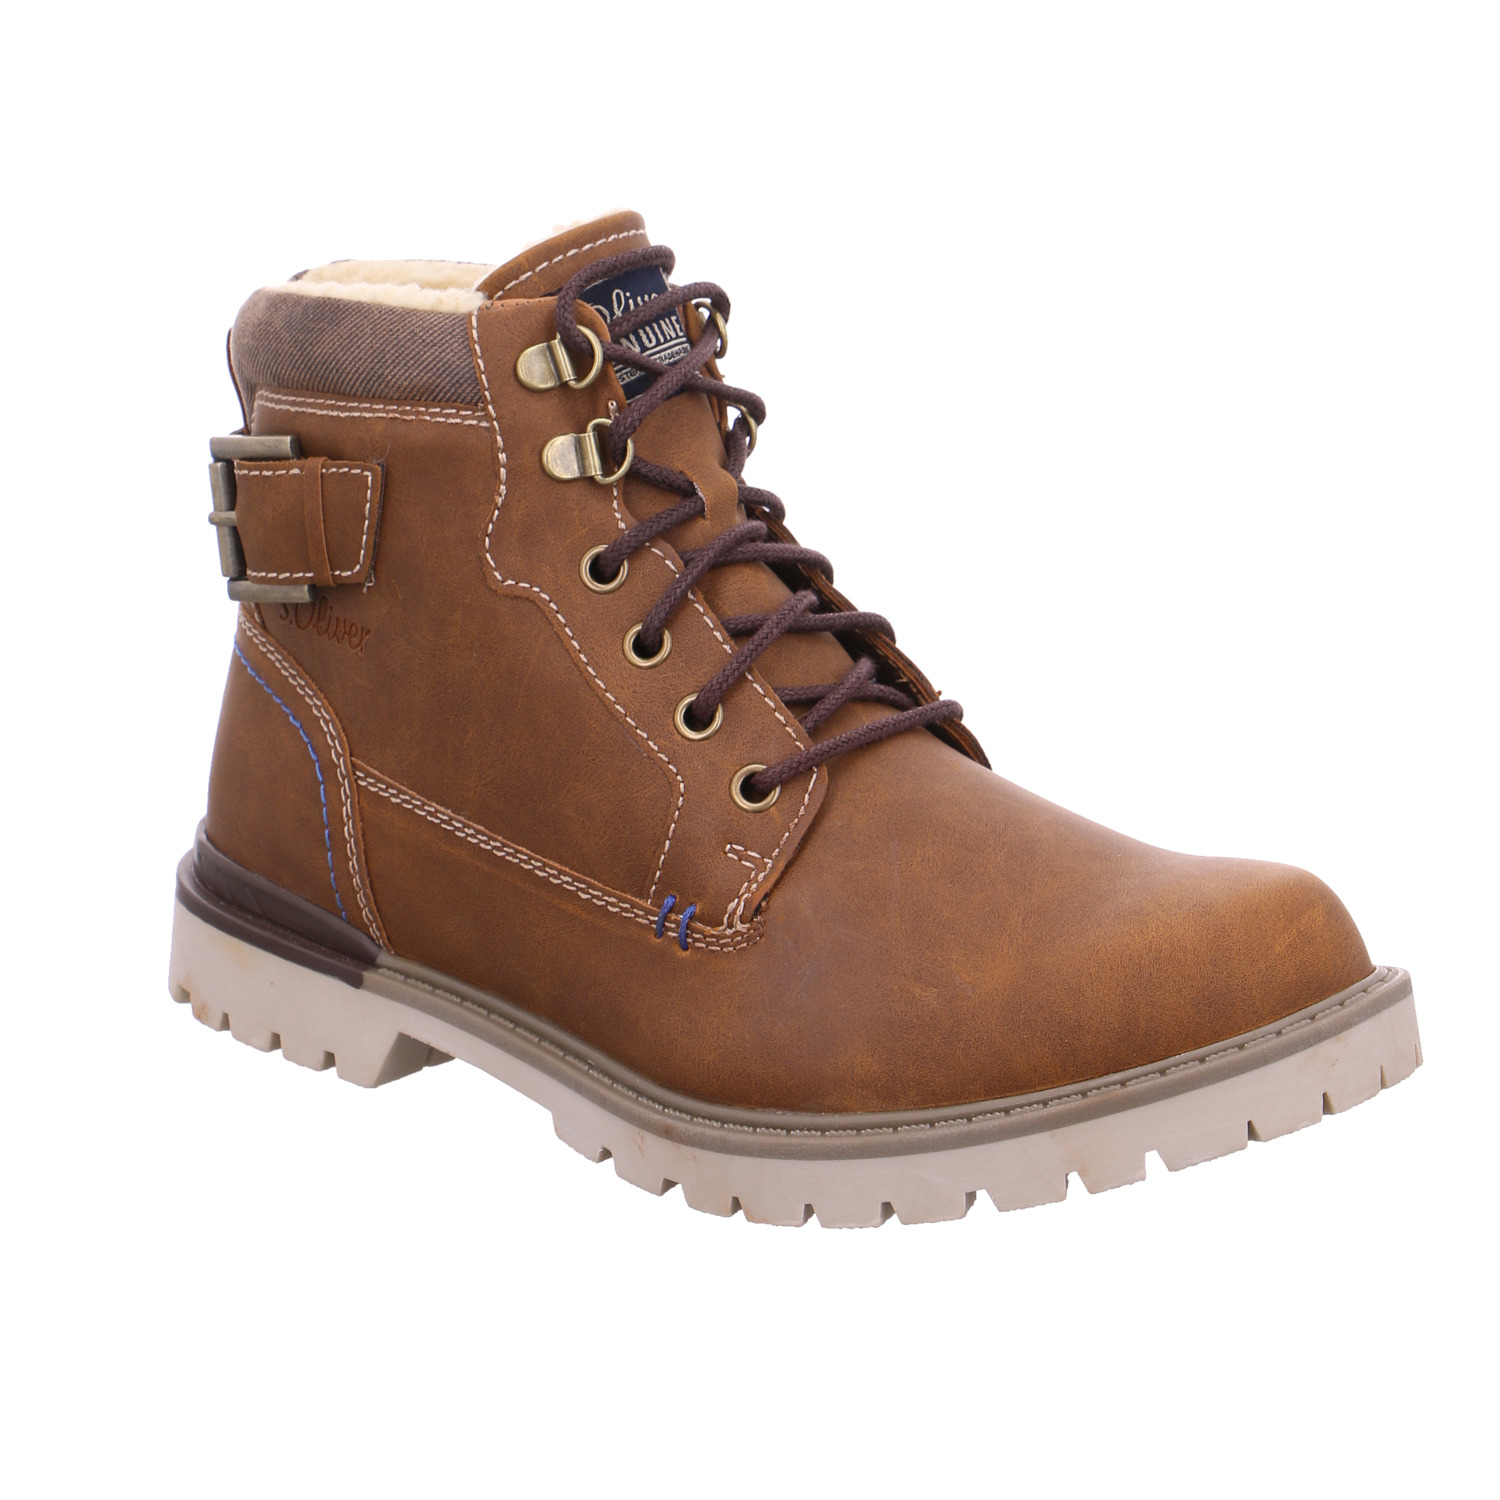 S.OLIVER Winter-Boots Cognac Synthetik